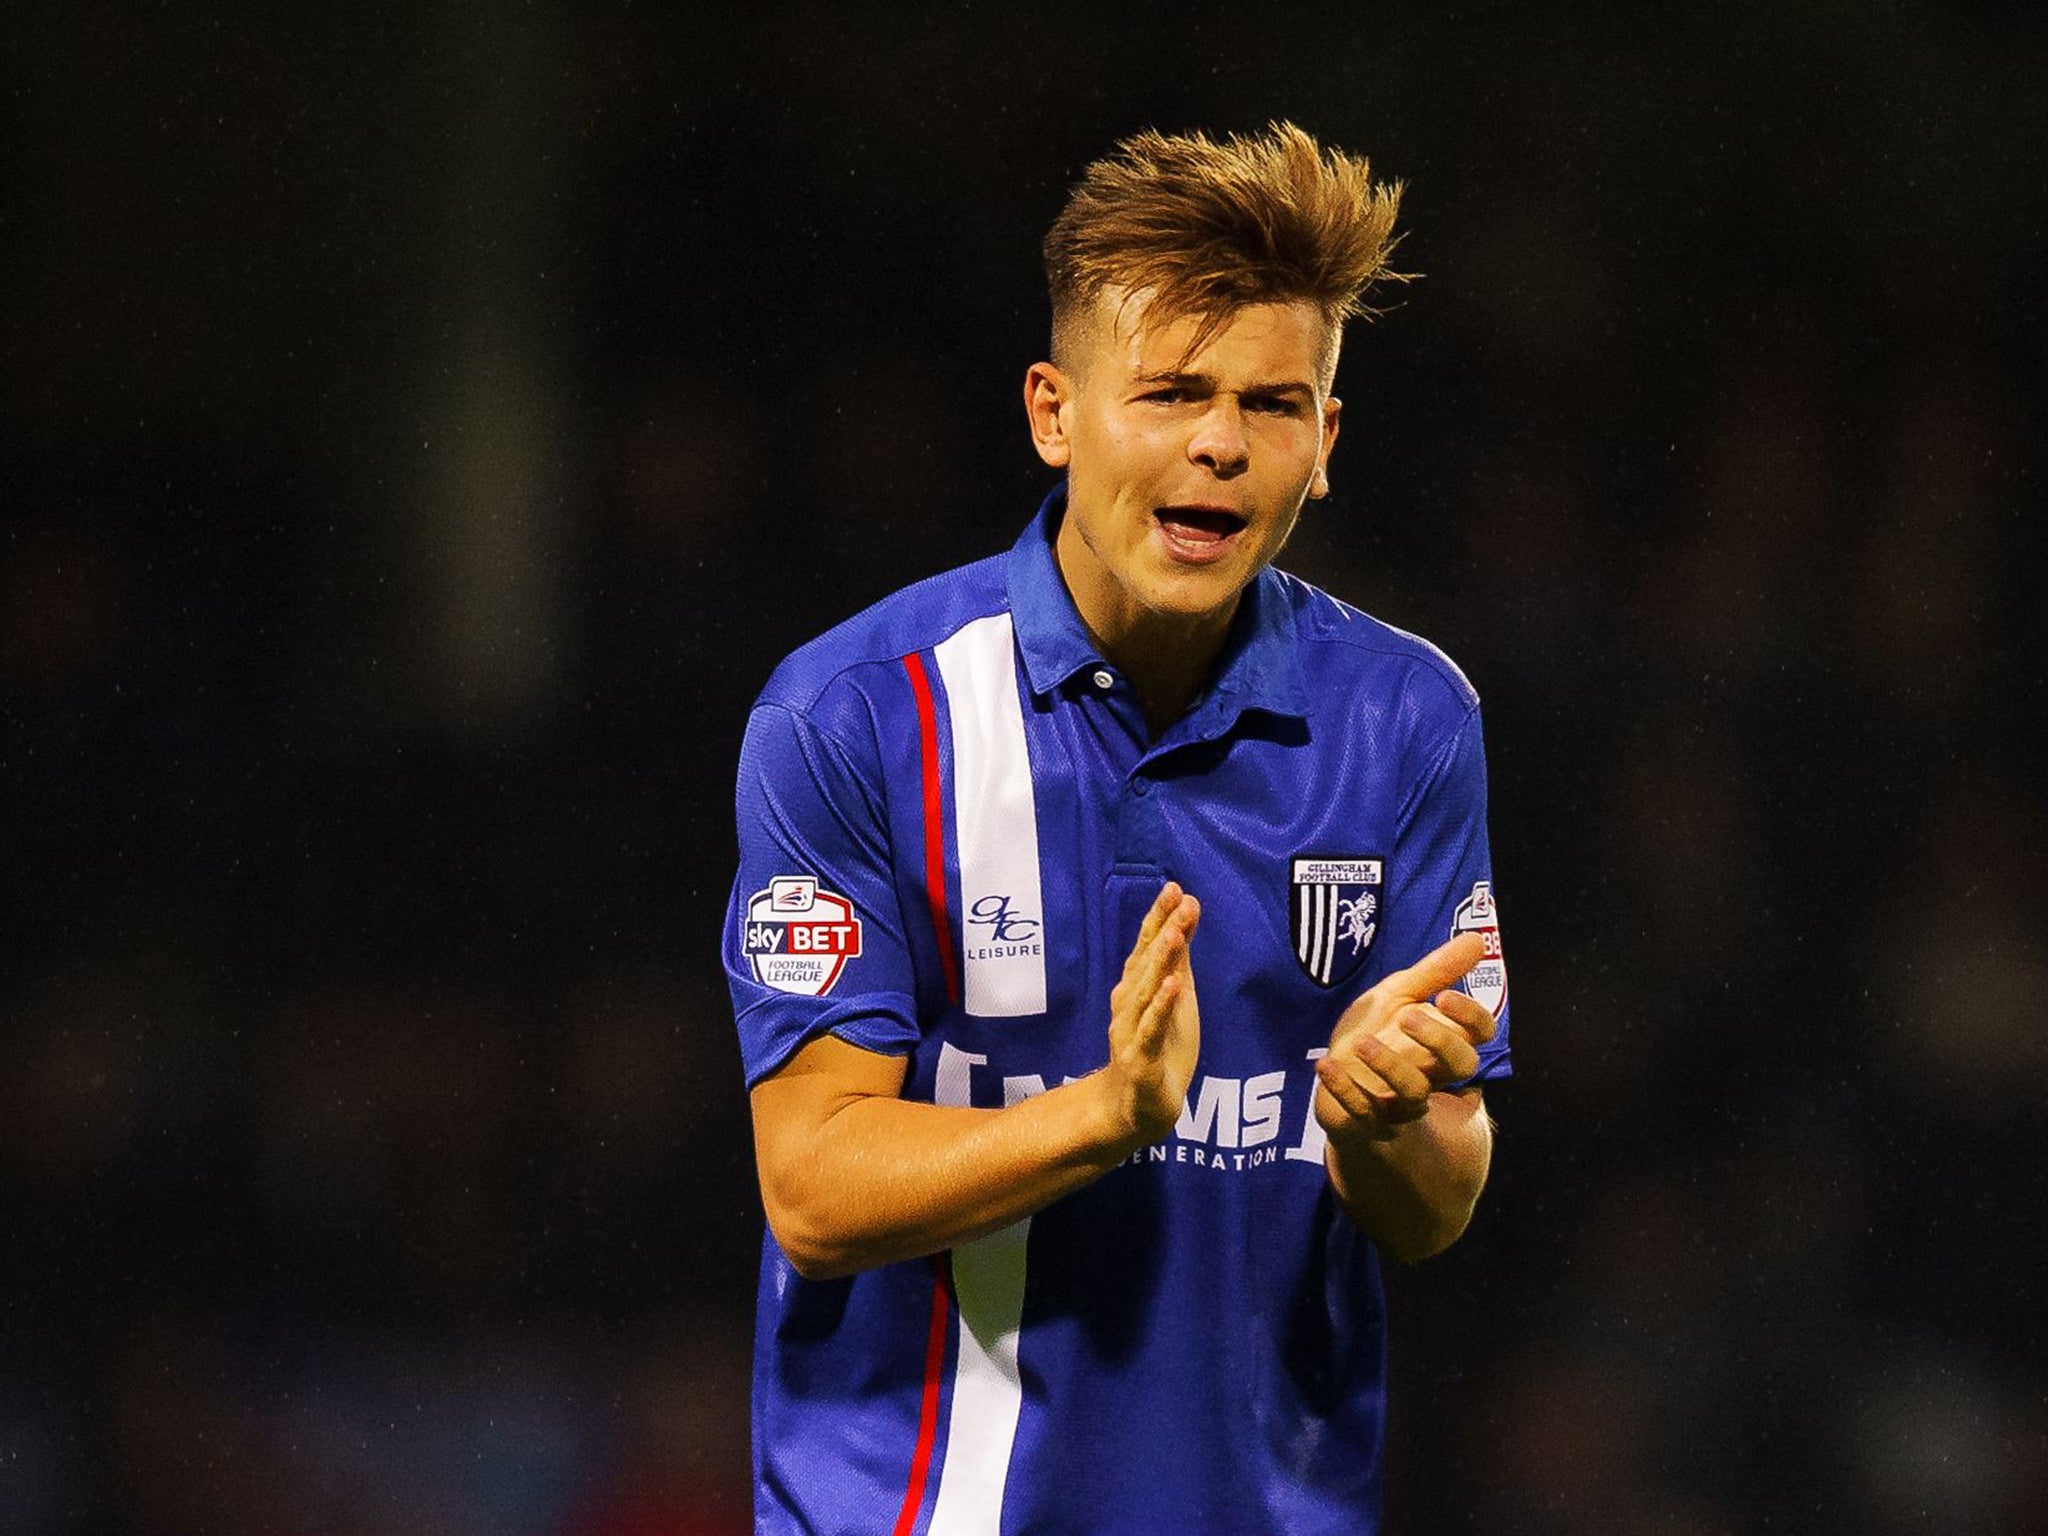 Jake Hessenthaler was released by Chelsea but has bounced back at Gillingham – where his dad played